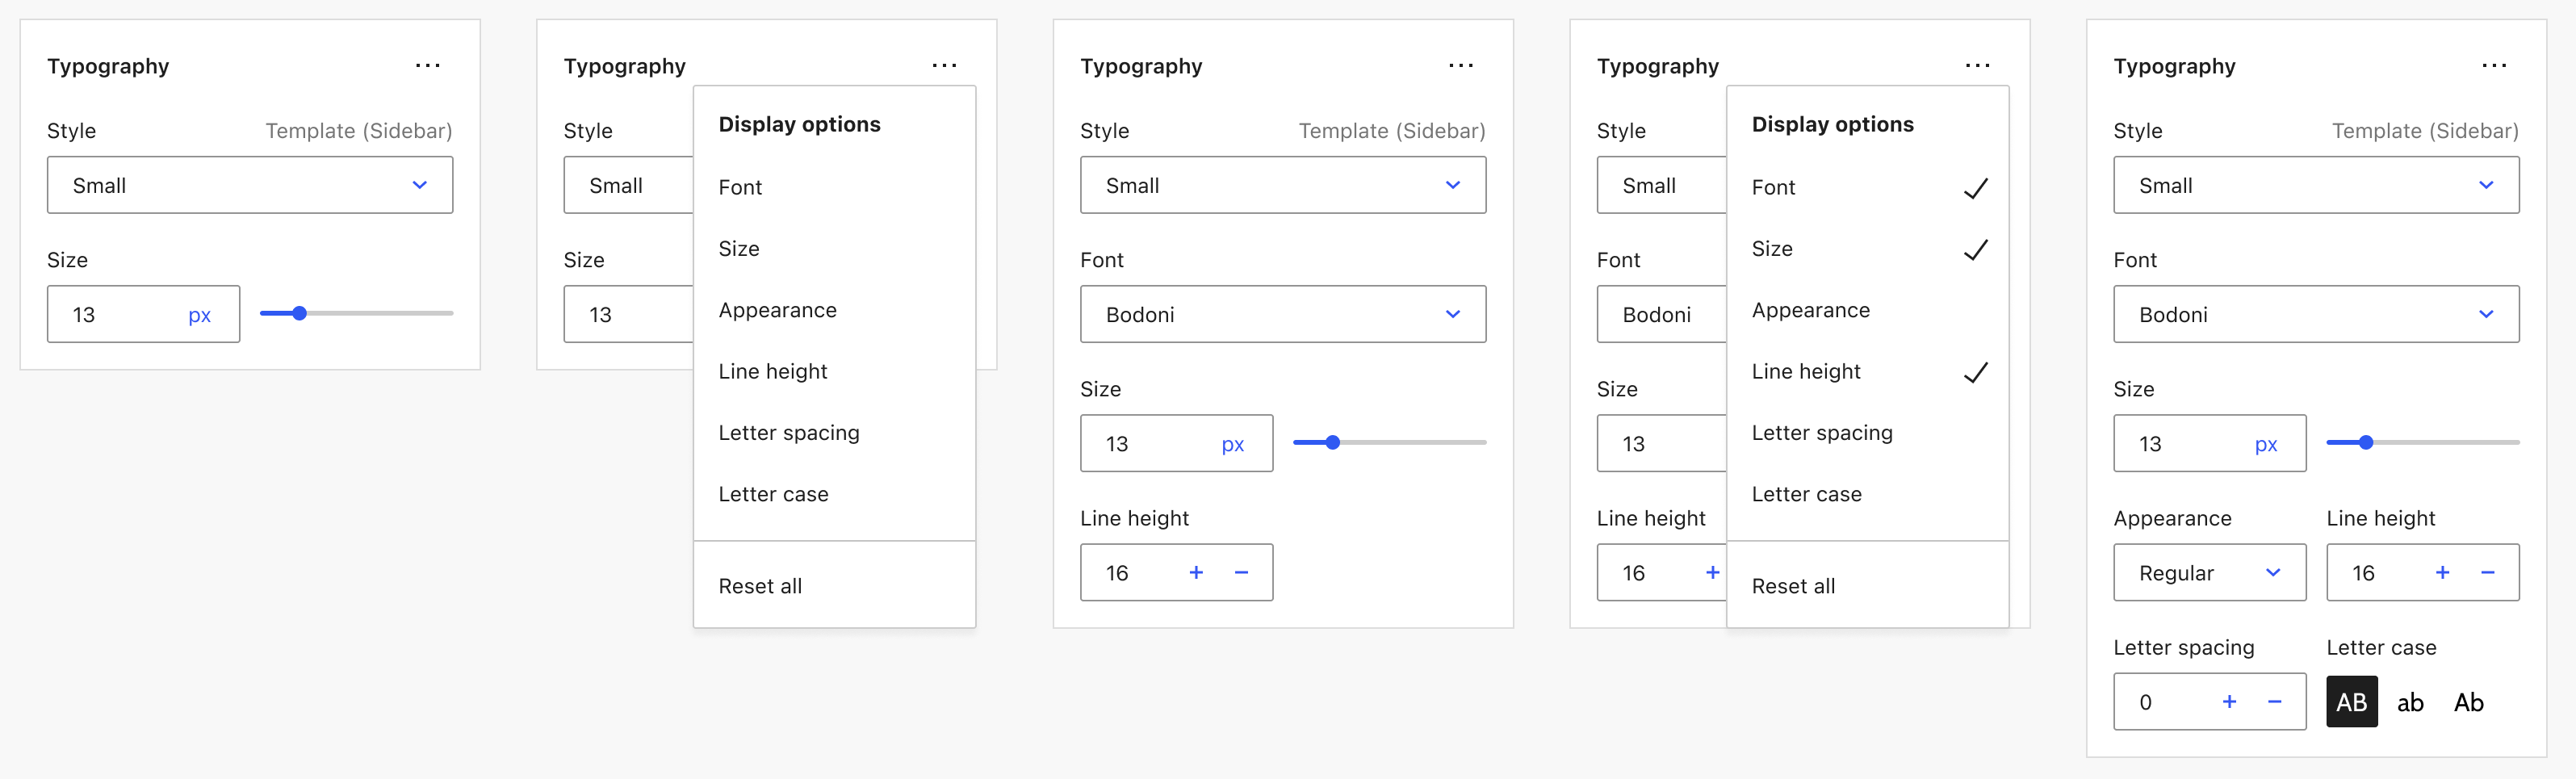 Gutenberg block editor proposal for toggling typography controls.